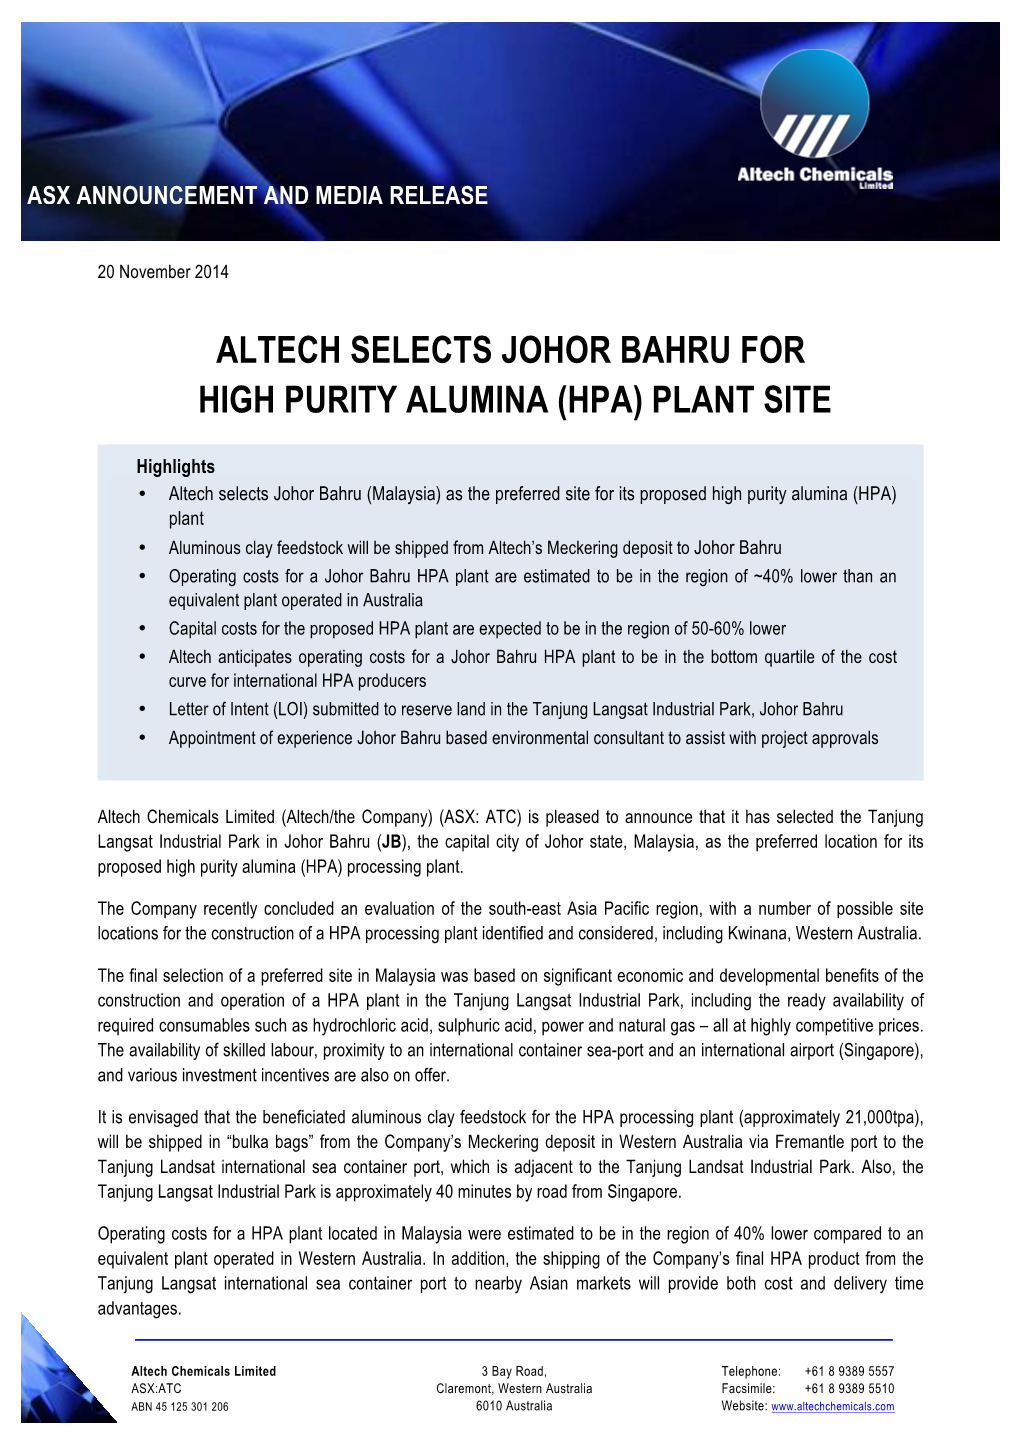 Altech Selects Johor Bahru for High Purity Alumina (Hpa) Plant Site